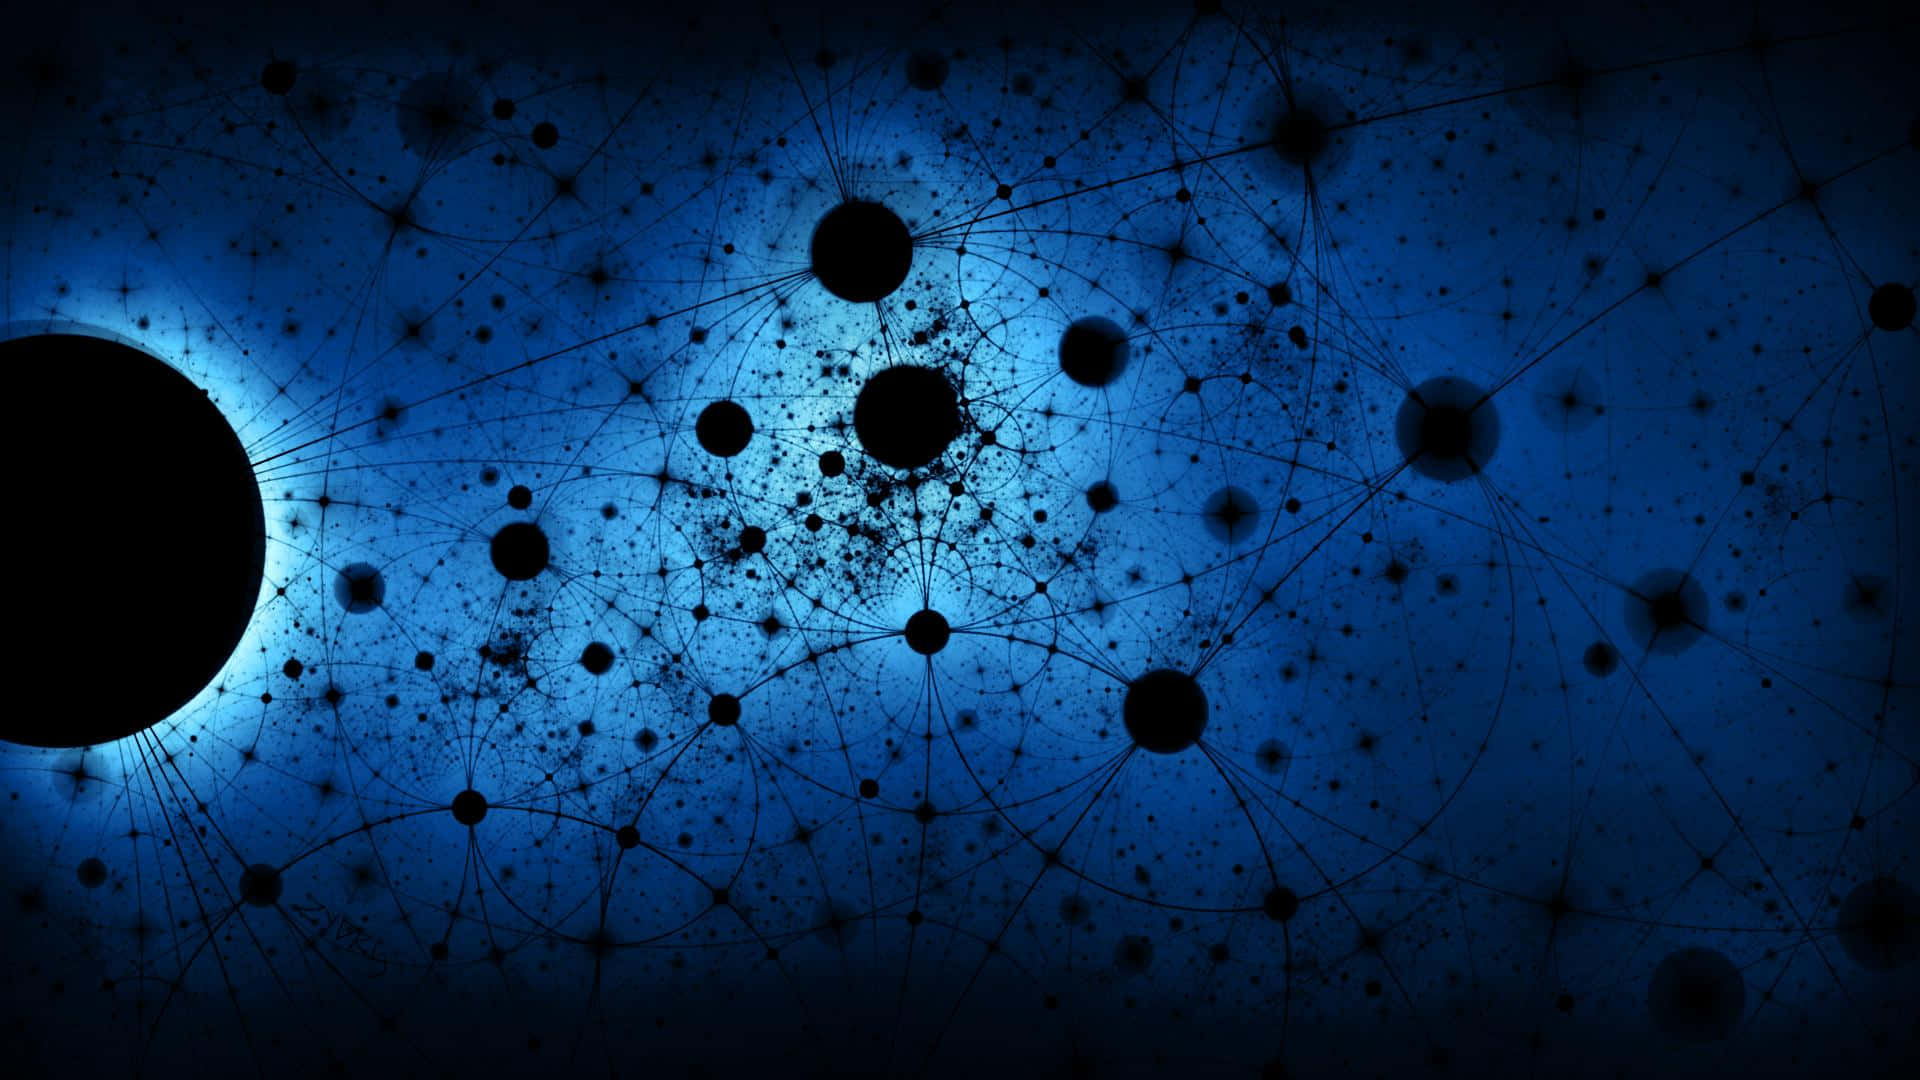 A Blue Background With A Black Circle And Black Dots